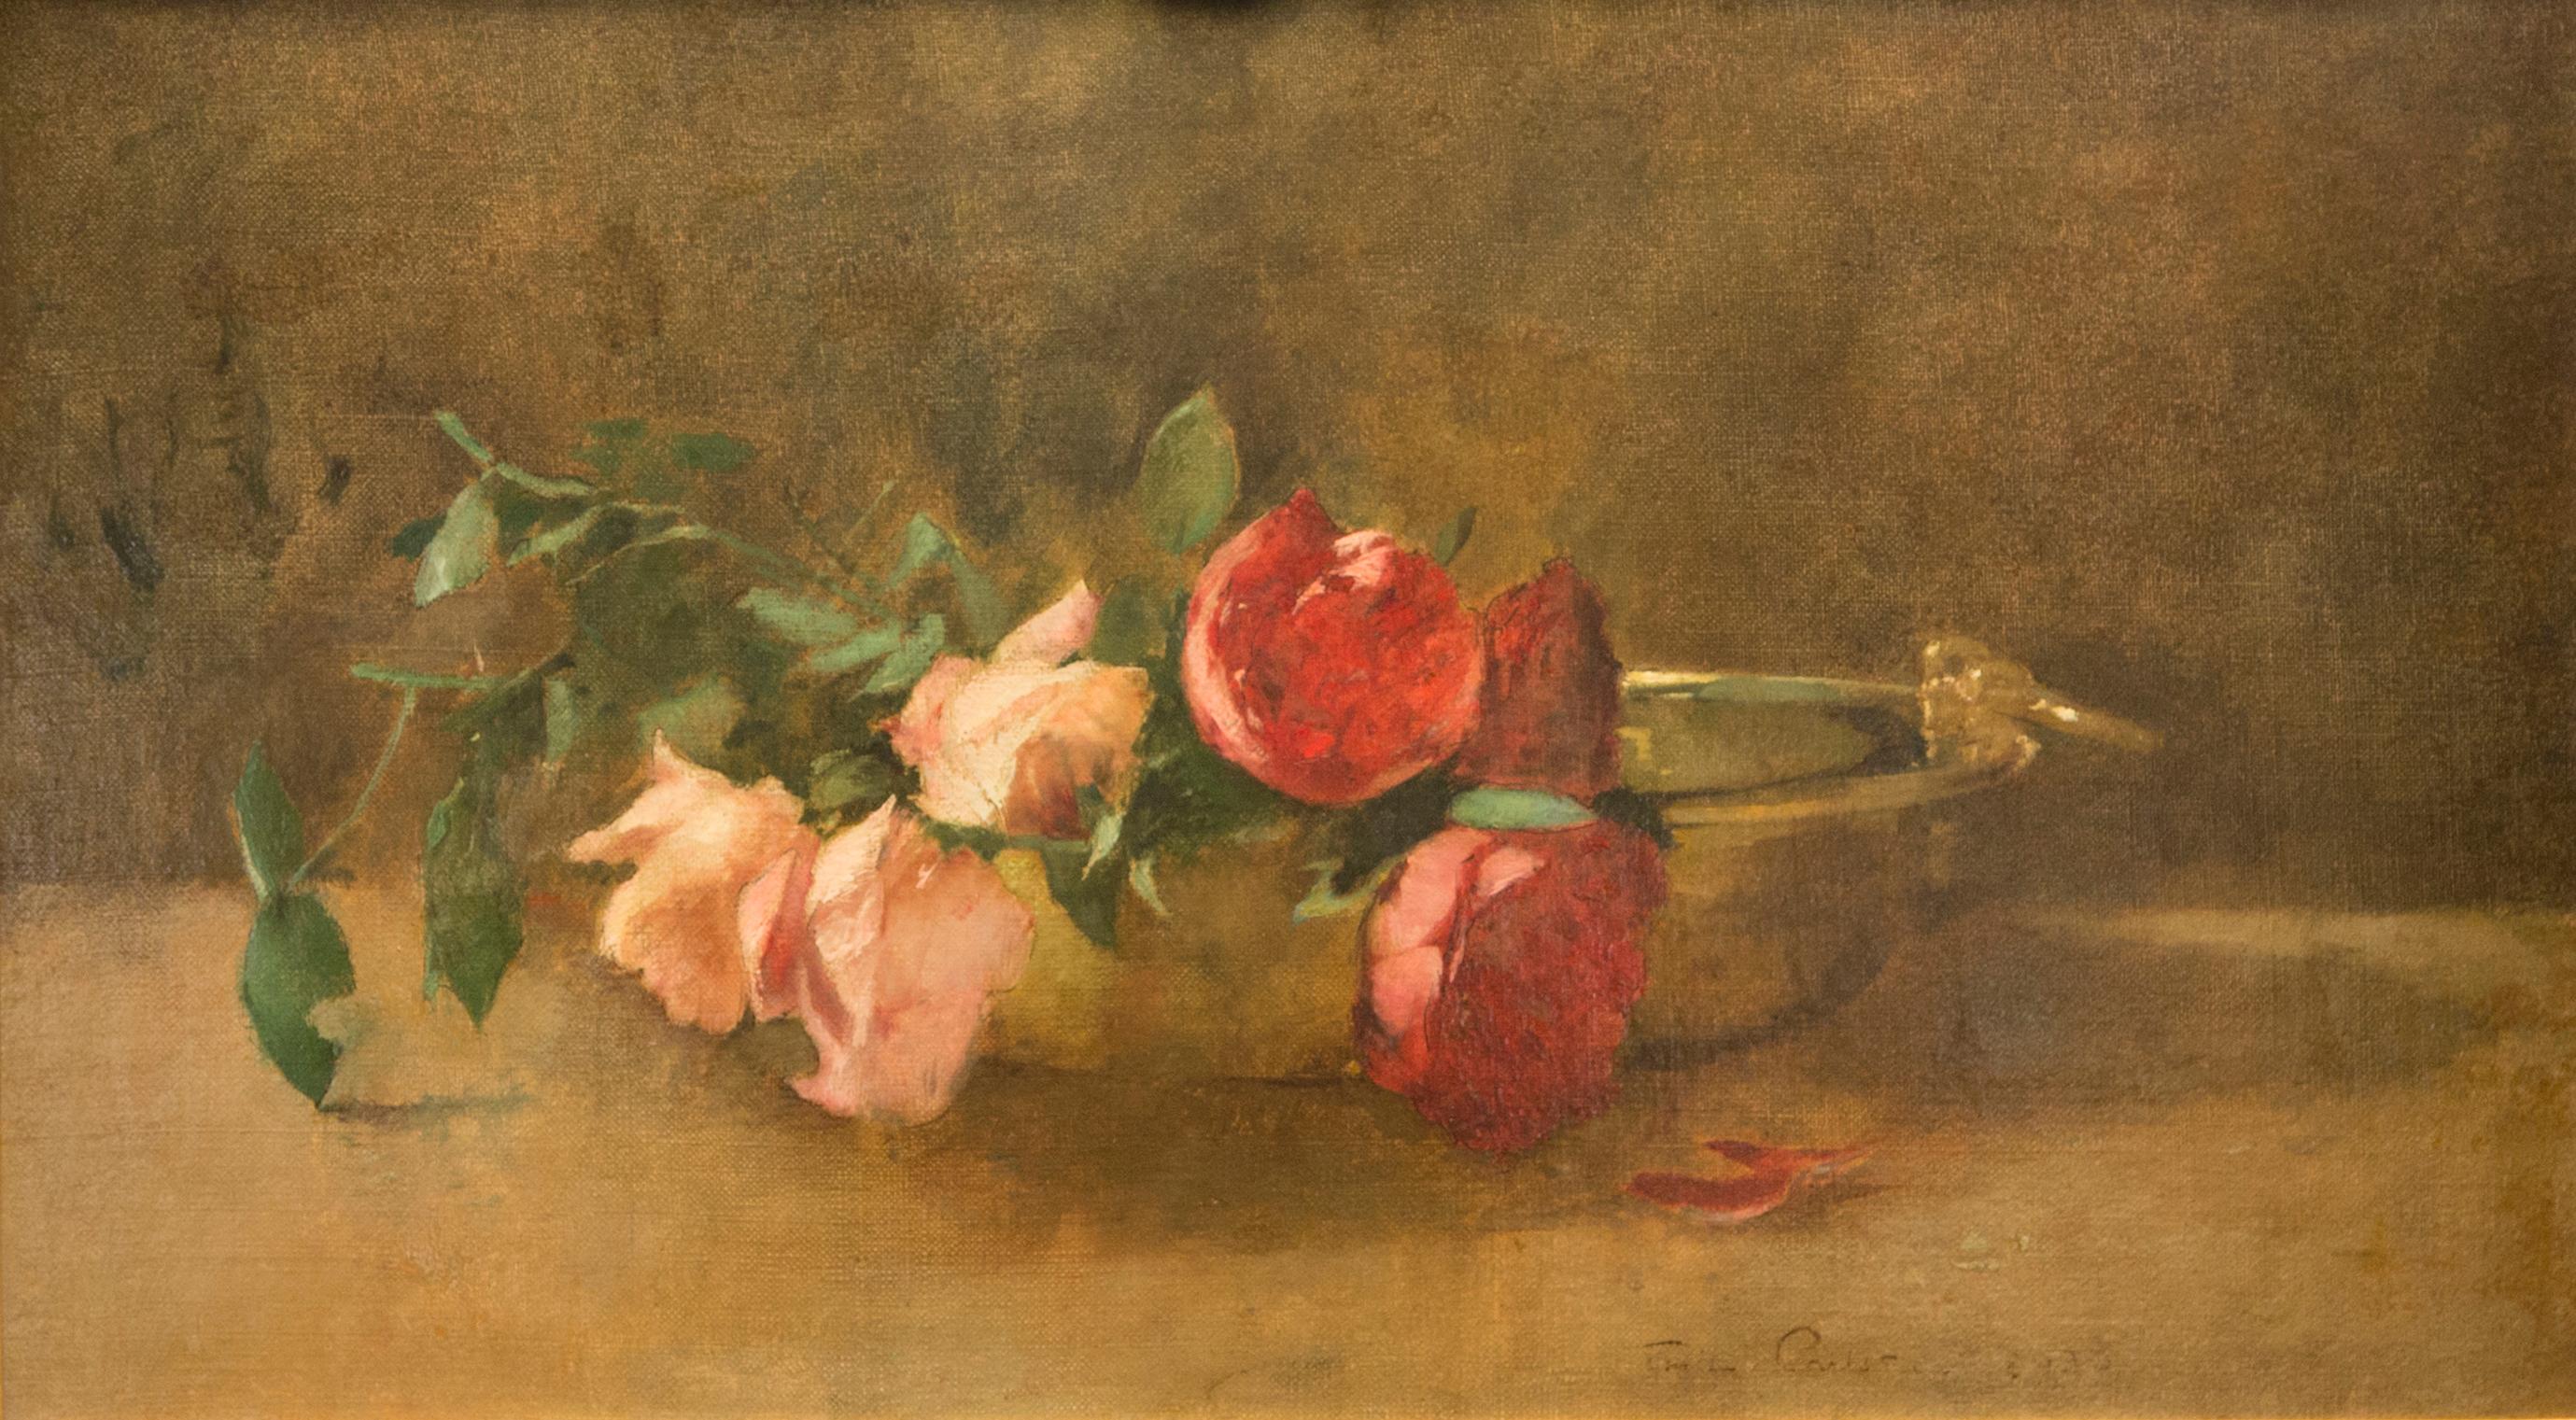 Roses in a Copper Bowl - Painting by Soren Emil Carlsen